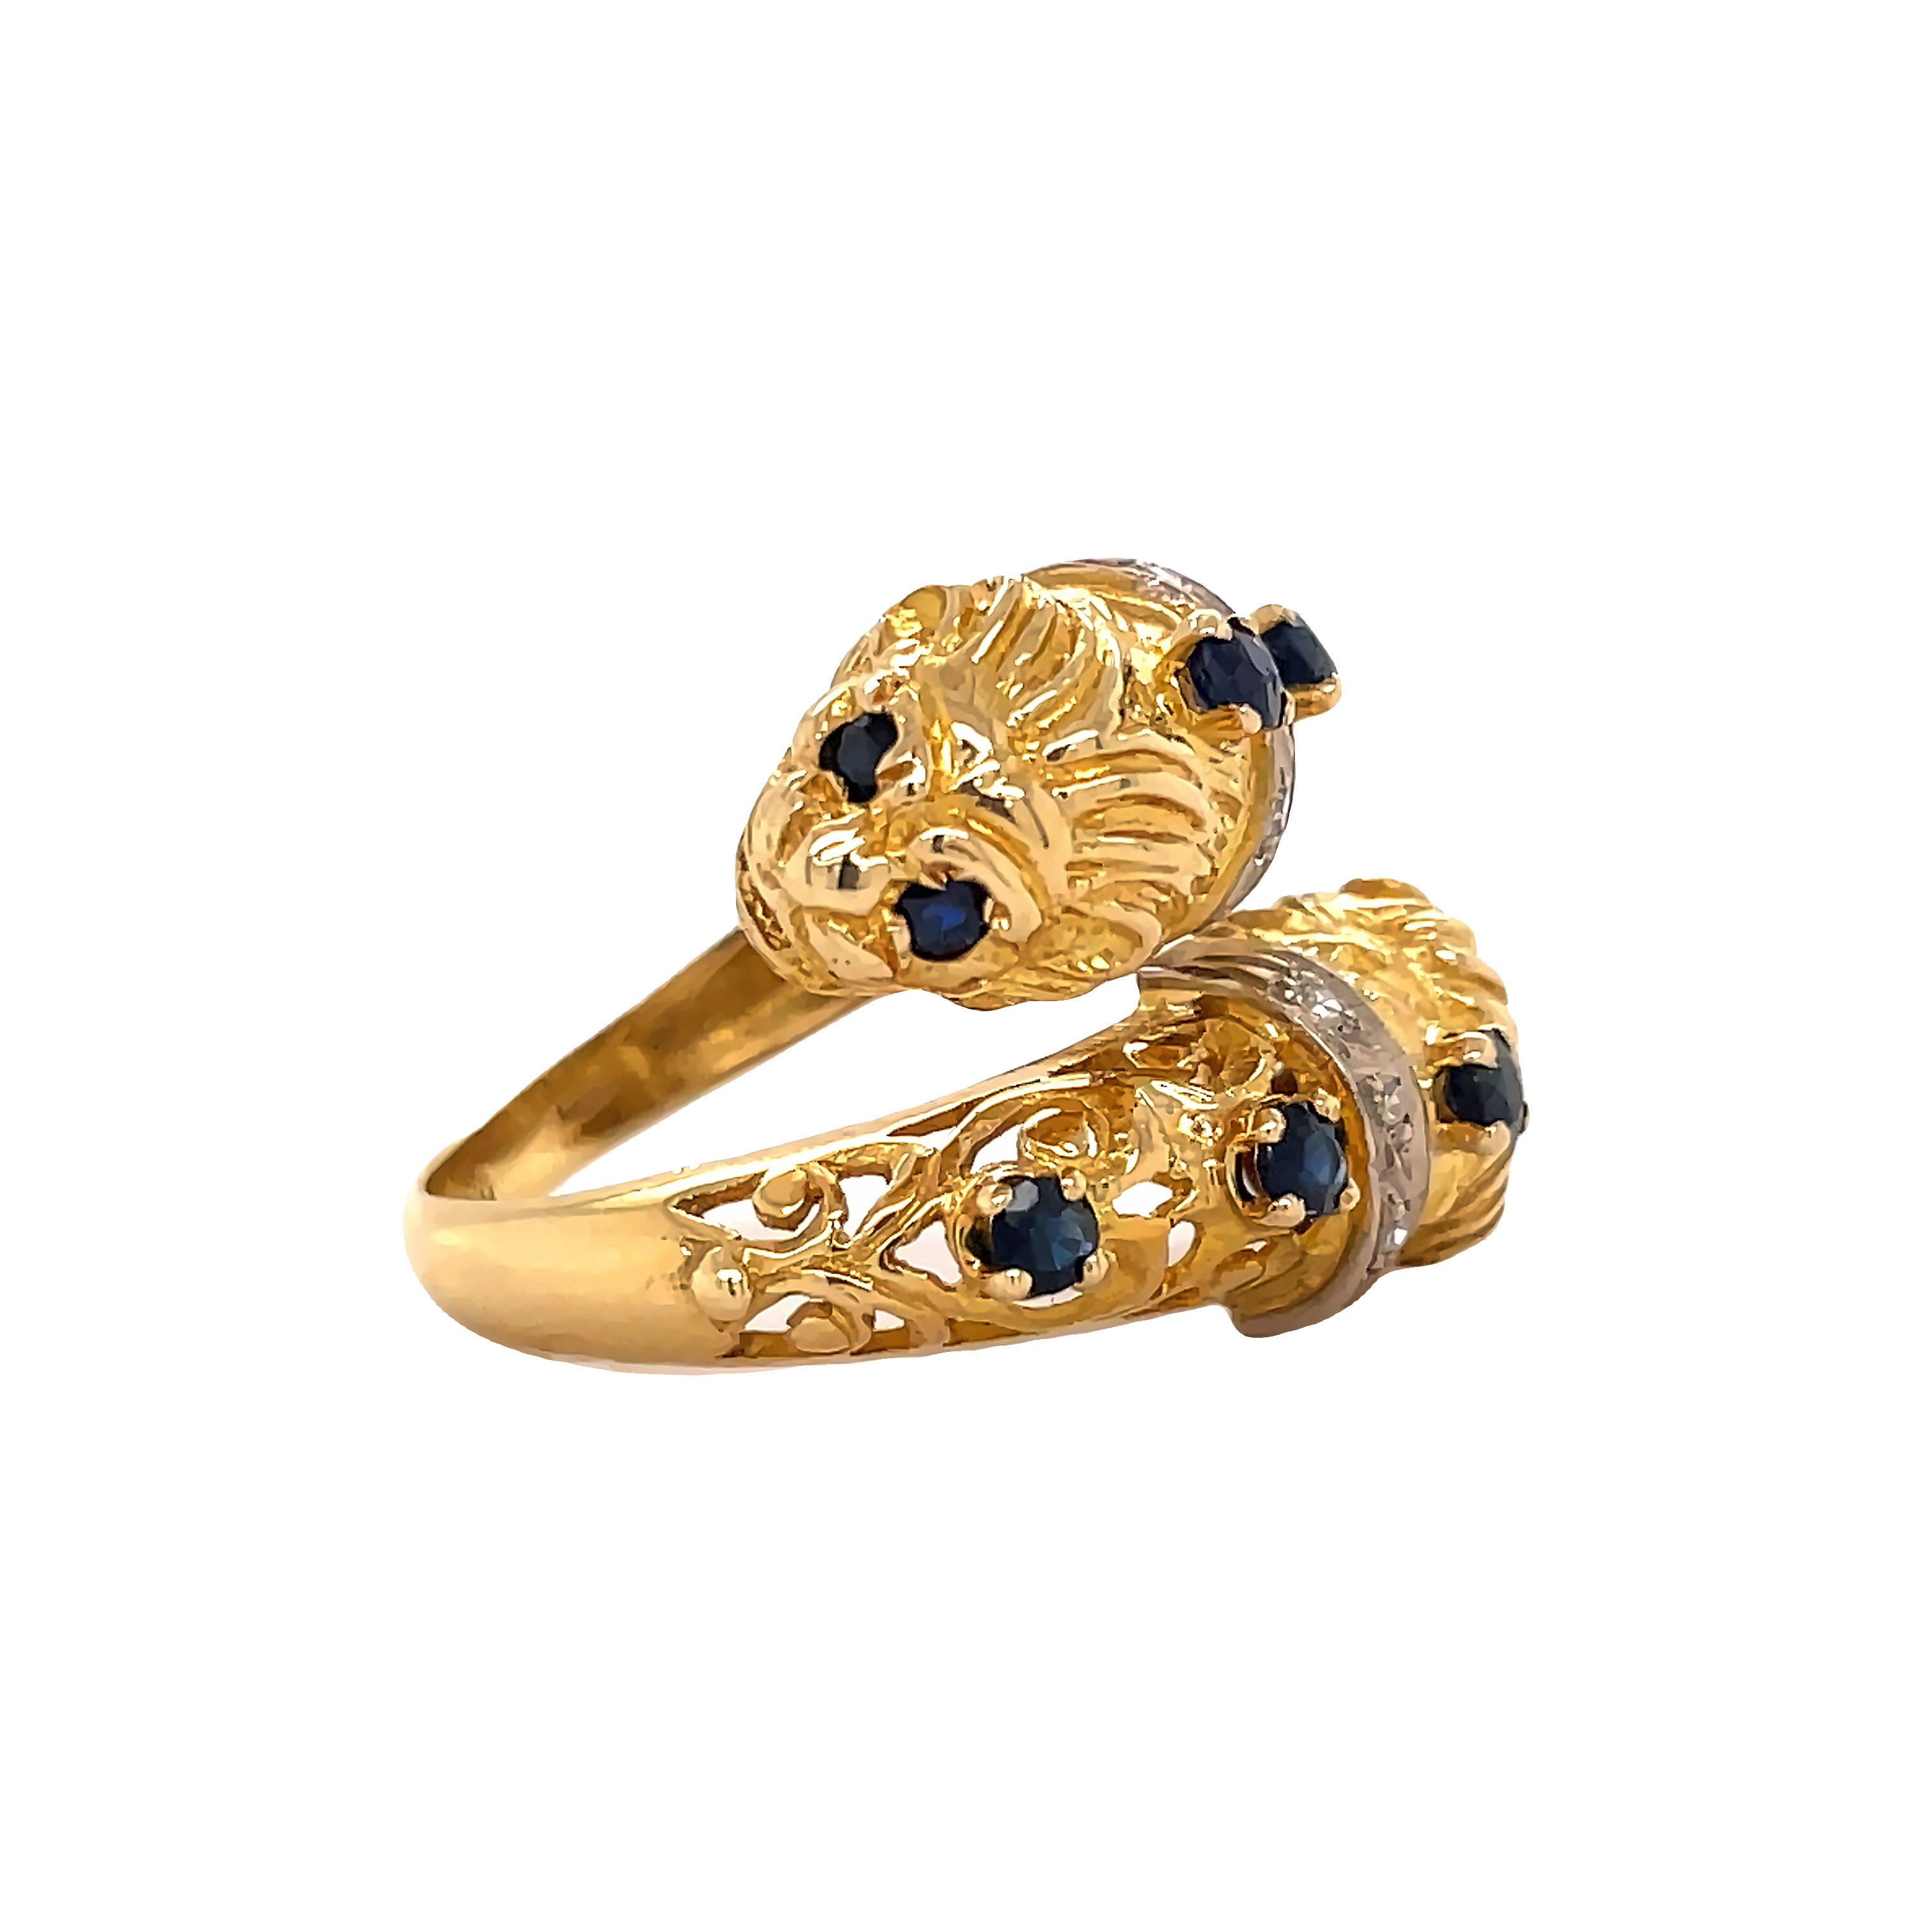 Beautiful estate jewelry ring.  14k yellow gold antique ring  Round diamonds   Round sapphires   Great condition.  Crossover lion faces